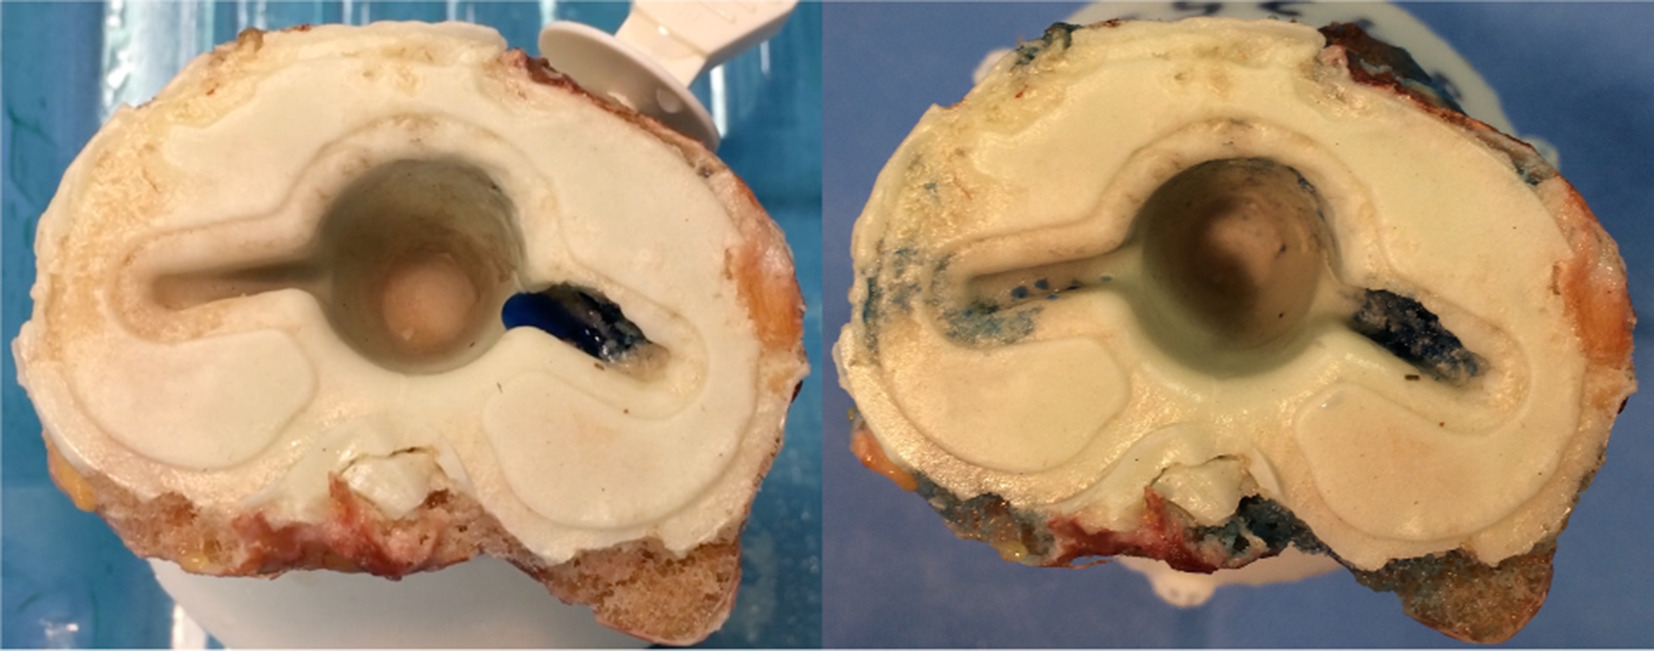 Fig. 7 
            For validation of the cement defects (using CT scans), and to check whether there was a direct connection between the medullary canal and the tibial component, 0.9% saline solution with blue pigments was injected into the medullary canal distally of the prosthesis tip.
          